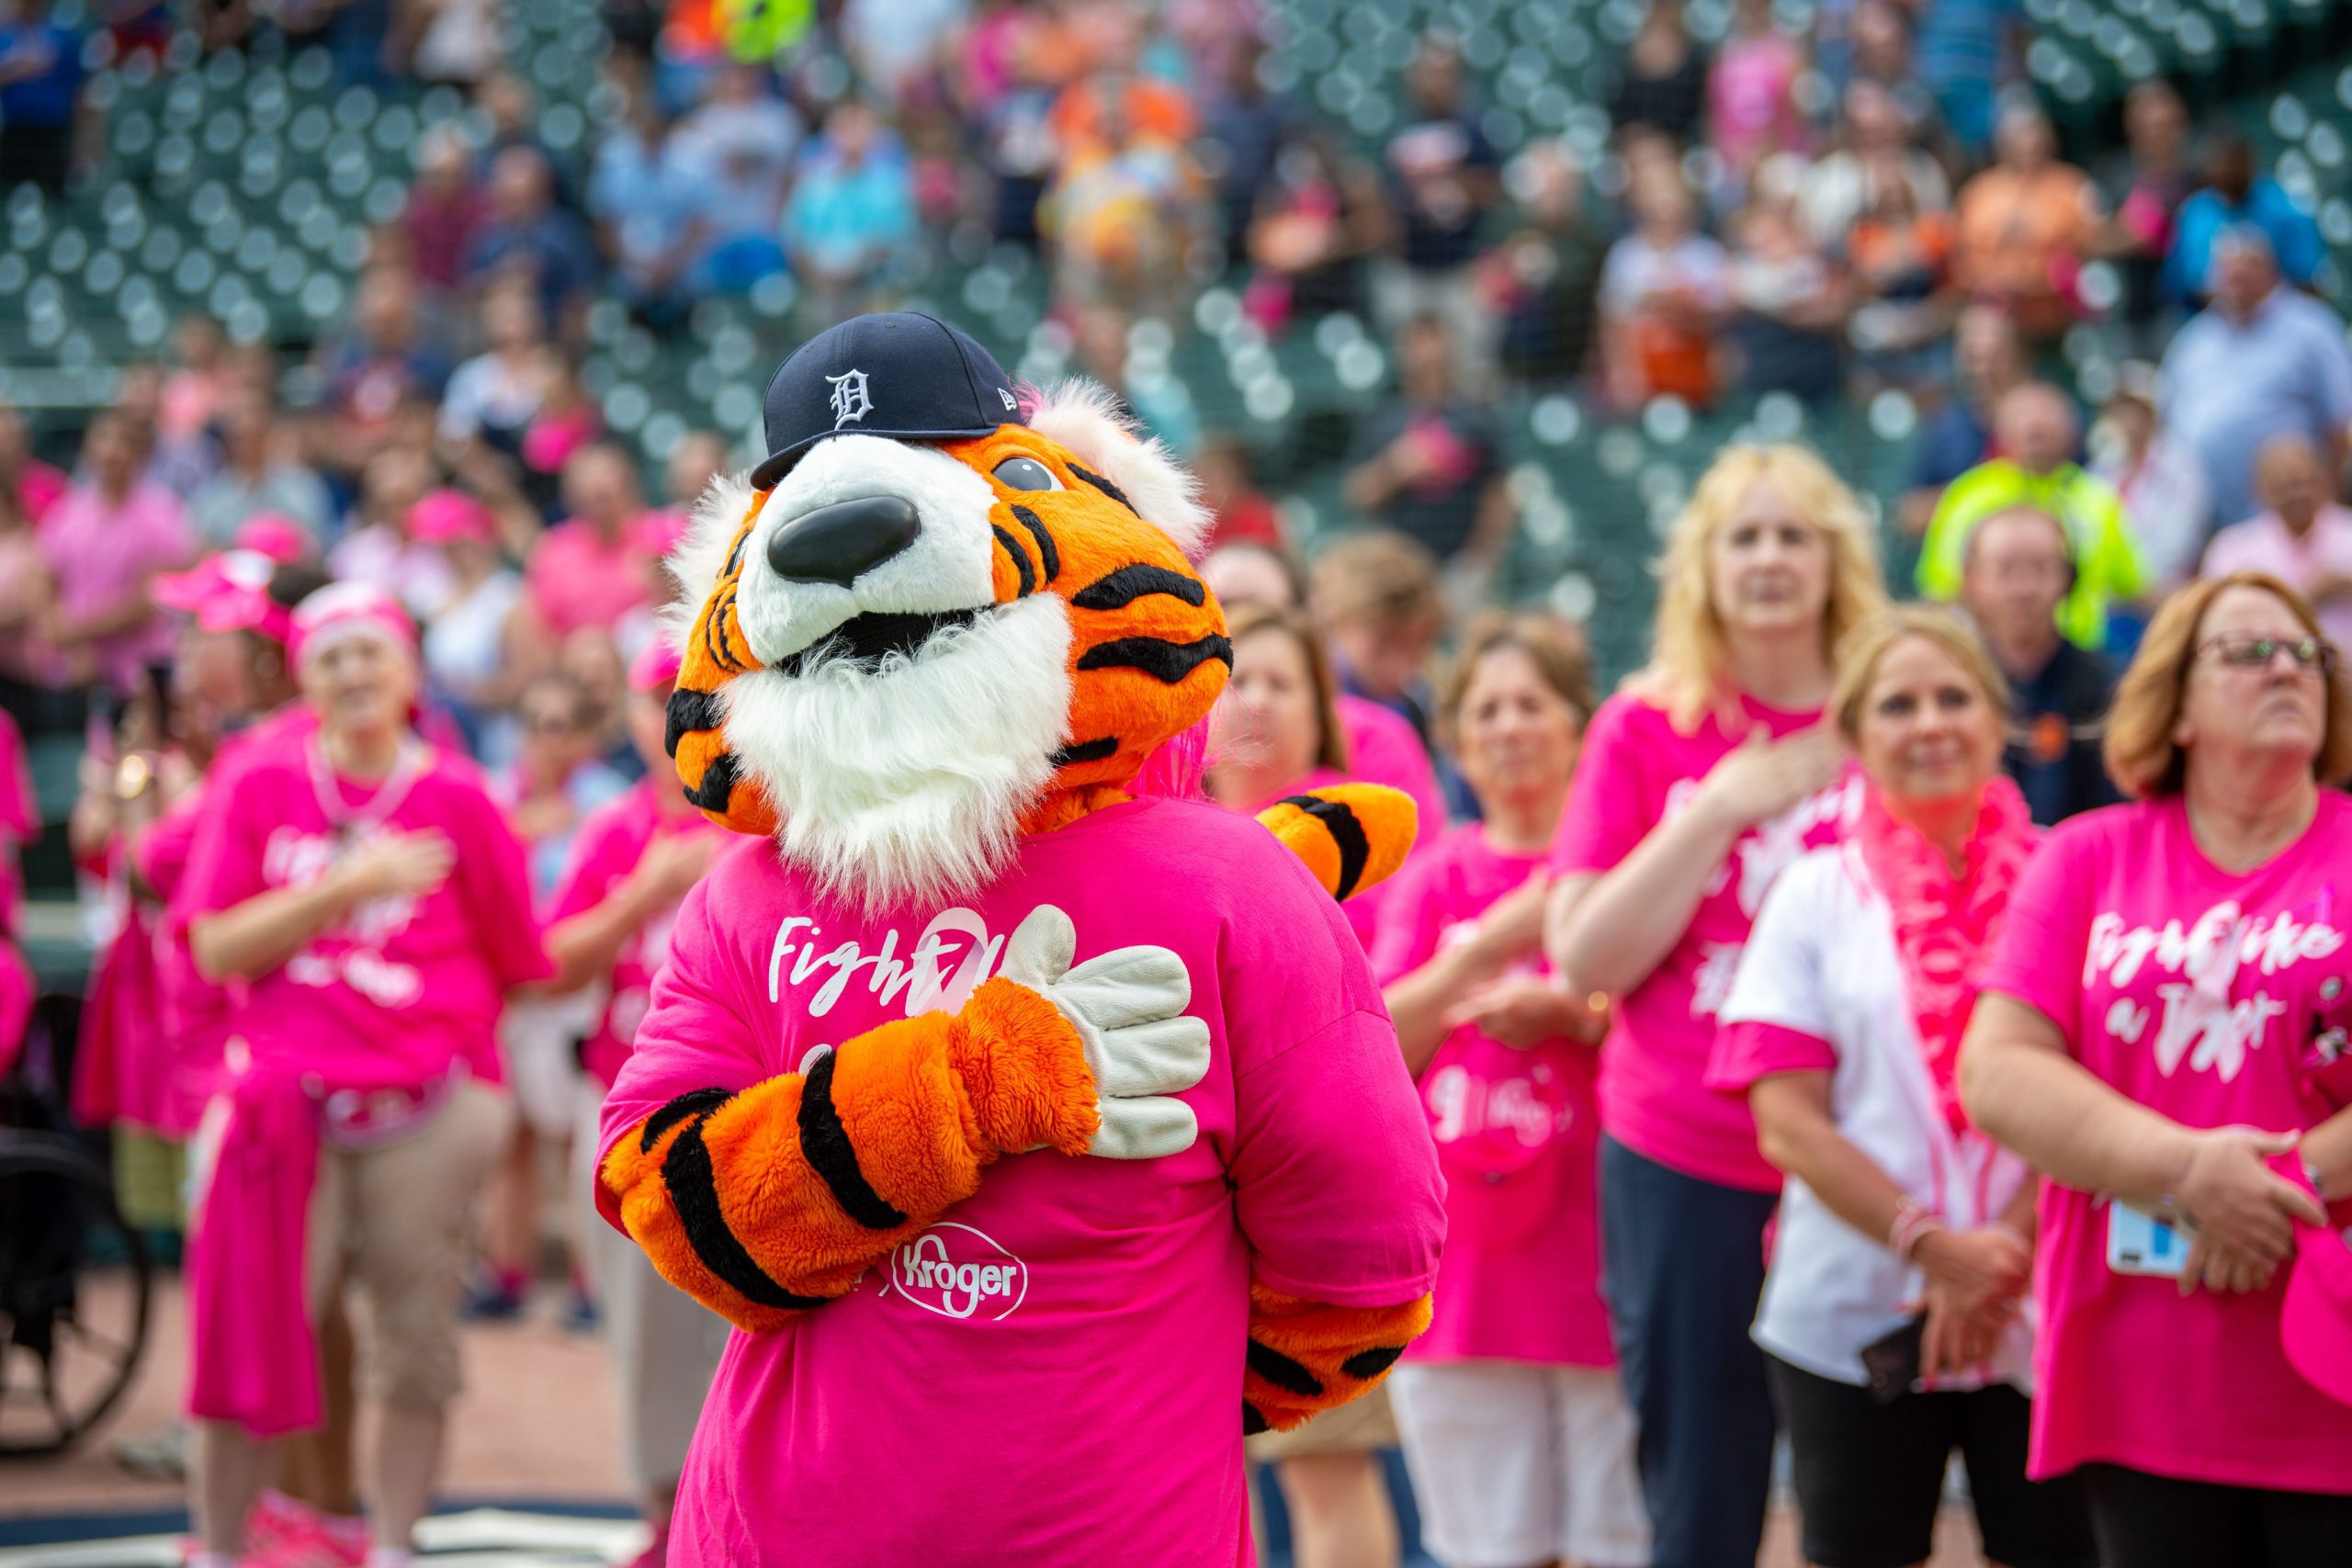 Karmanos Cancer Institute and the Detroit Tigers honor survivors and  promote breast health at 10th Annual Pink Out the Park game